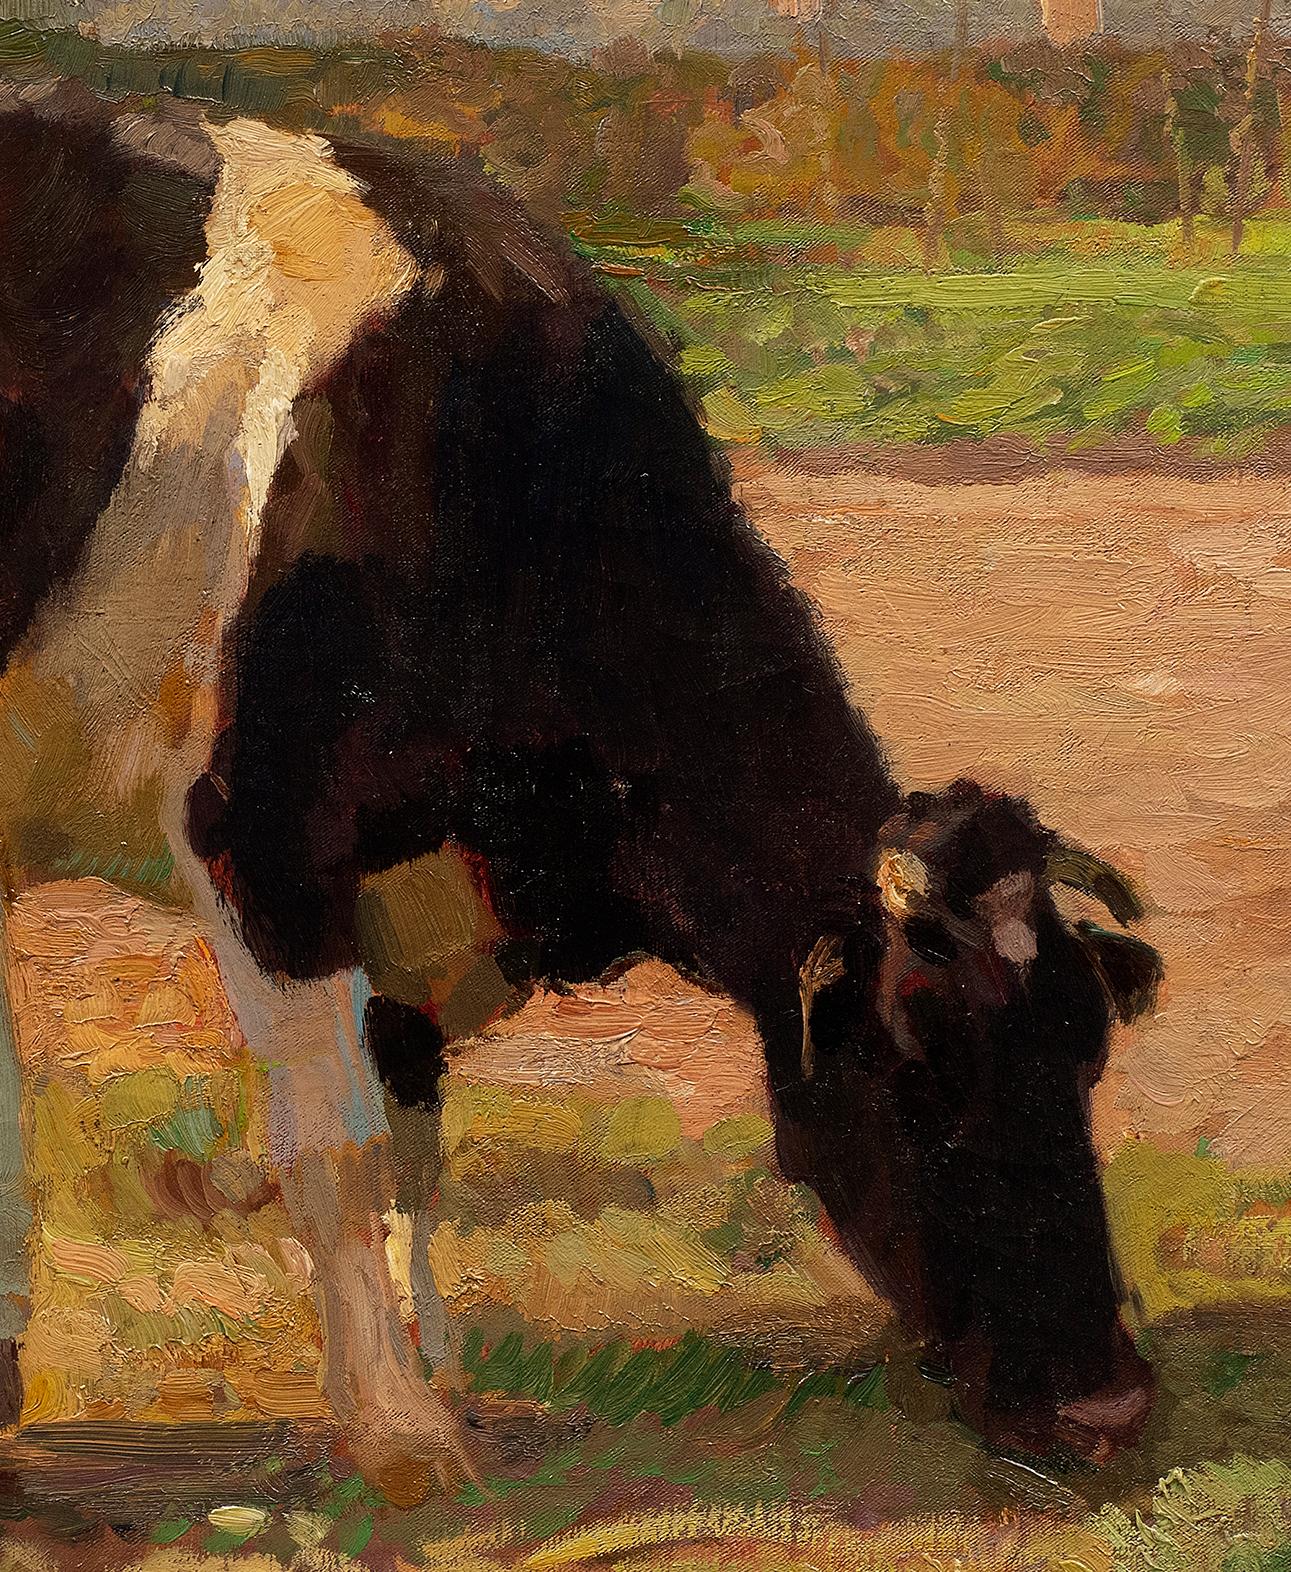 “Summer in the Pasture (Farmer’s Wife with Cow)”
(Sommertag auf der Weide (Bäuerin mit Kuh))
Paul Junghanns (German, 1876-1958)
Oil on Canvas
36 ¼ x 28 inches (43 ¾ x 35 ¼) 

This is a superb painting. On Junghann's finest pieces, such as this one,